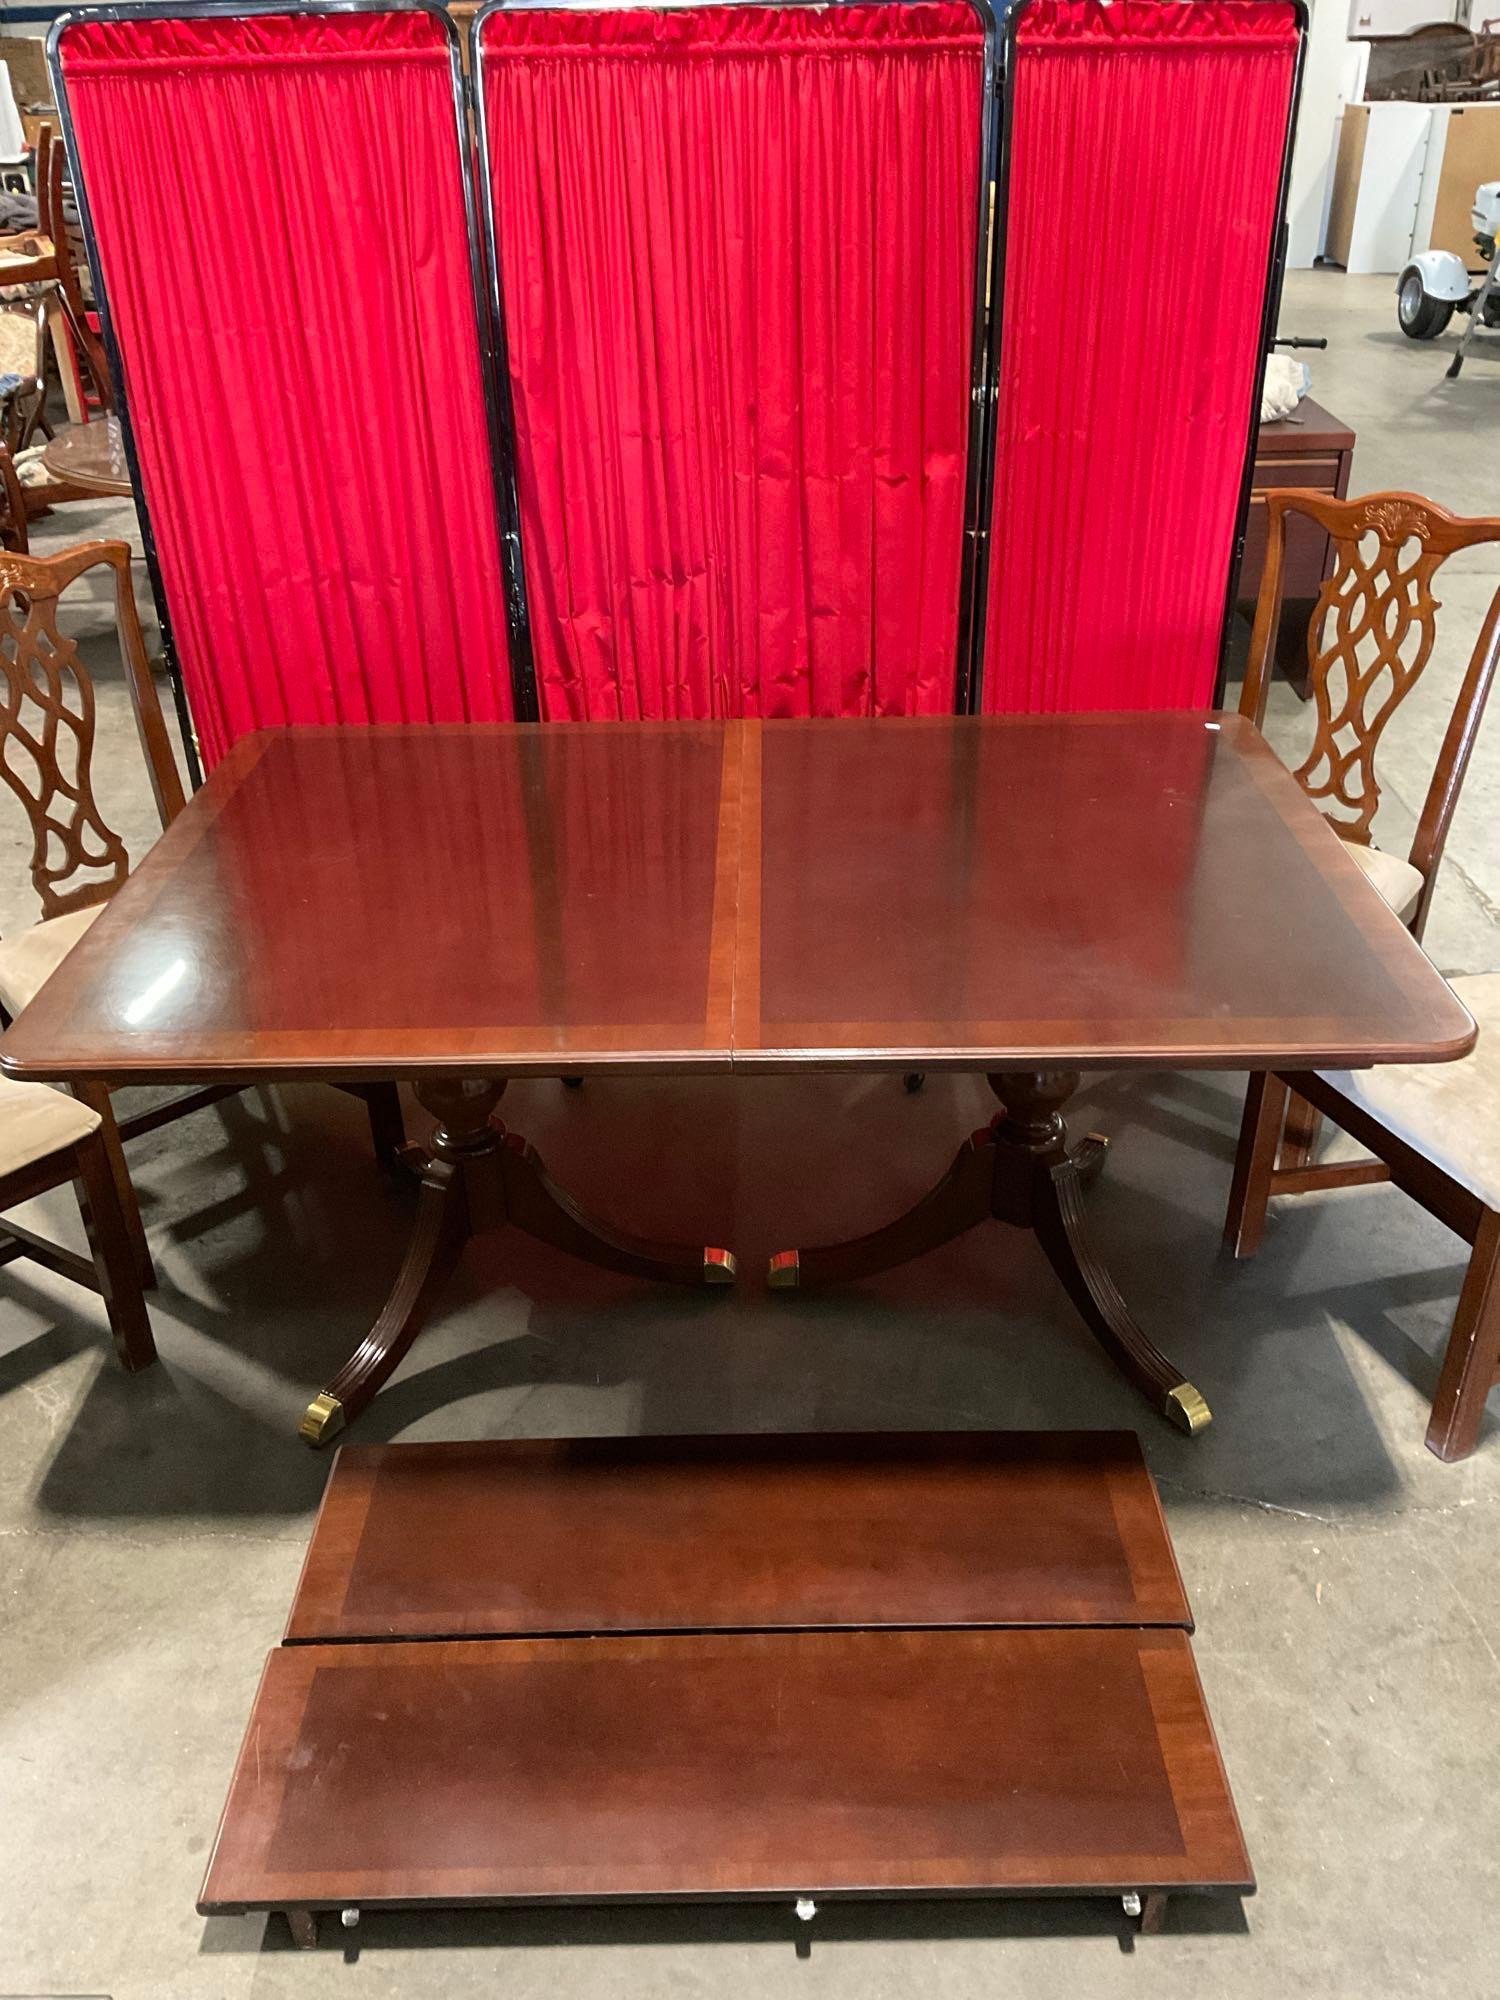 Vintage Universal Furniture Ltd. Wooden Dining Table w/ 4 Trellis Back Chairs & 2 extra Leaves. See